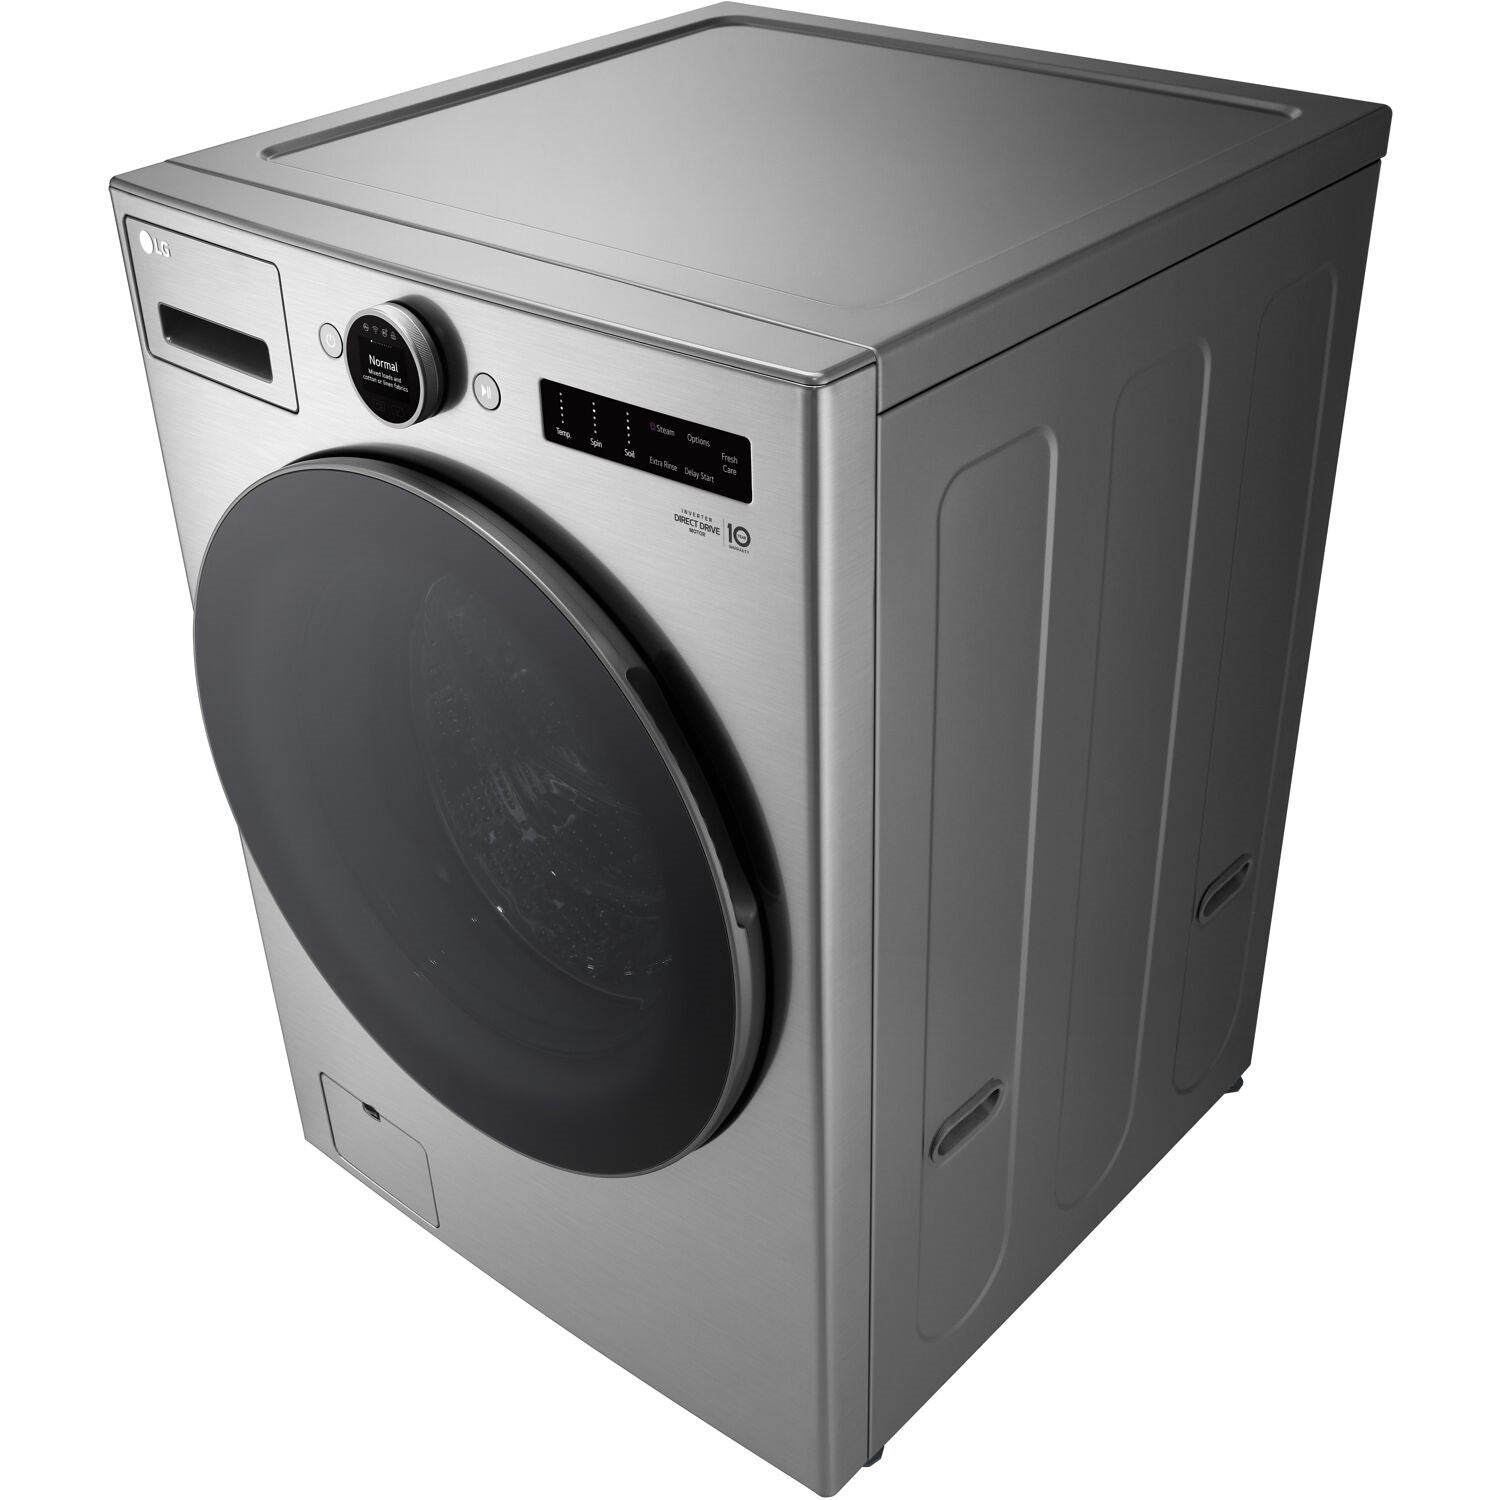 LG - 4.5 CF Ultra Large Capacity Front Load Washer with AIDD, Steam, Wi-Fi Wash Machines - WM5500HVA